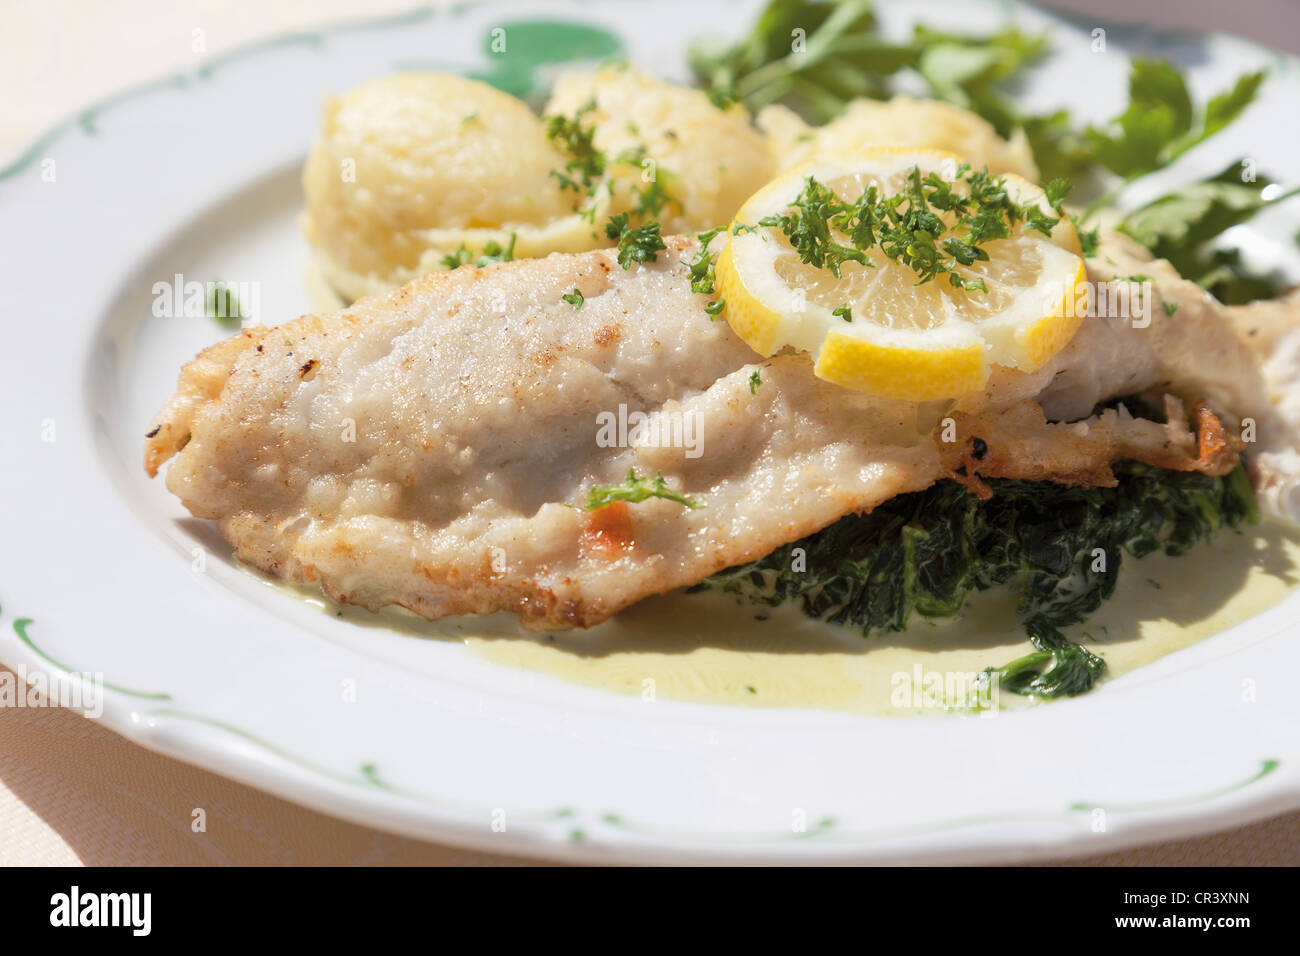 Fried pikeperch with mashed potatoes and spinach Stock Photo